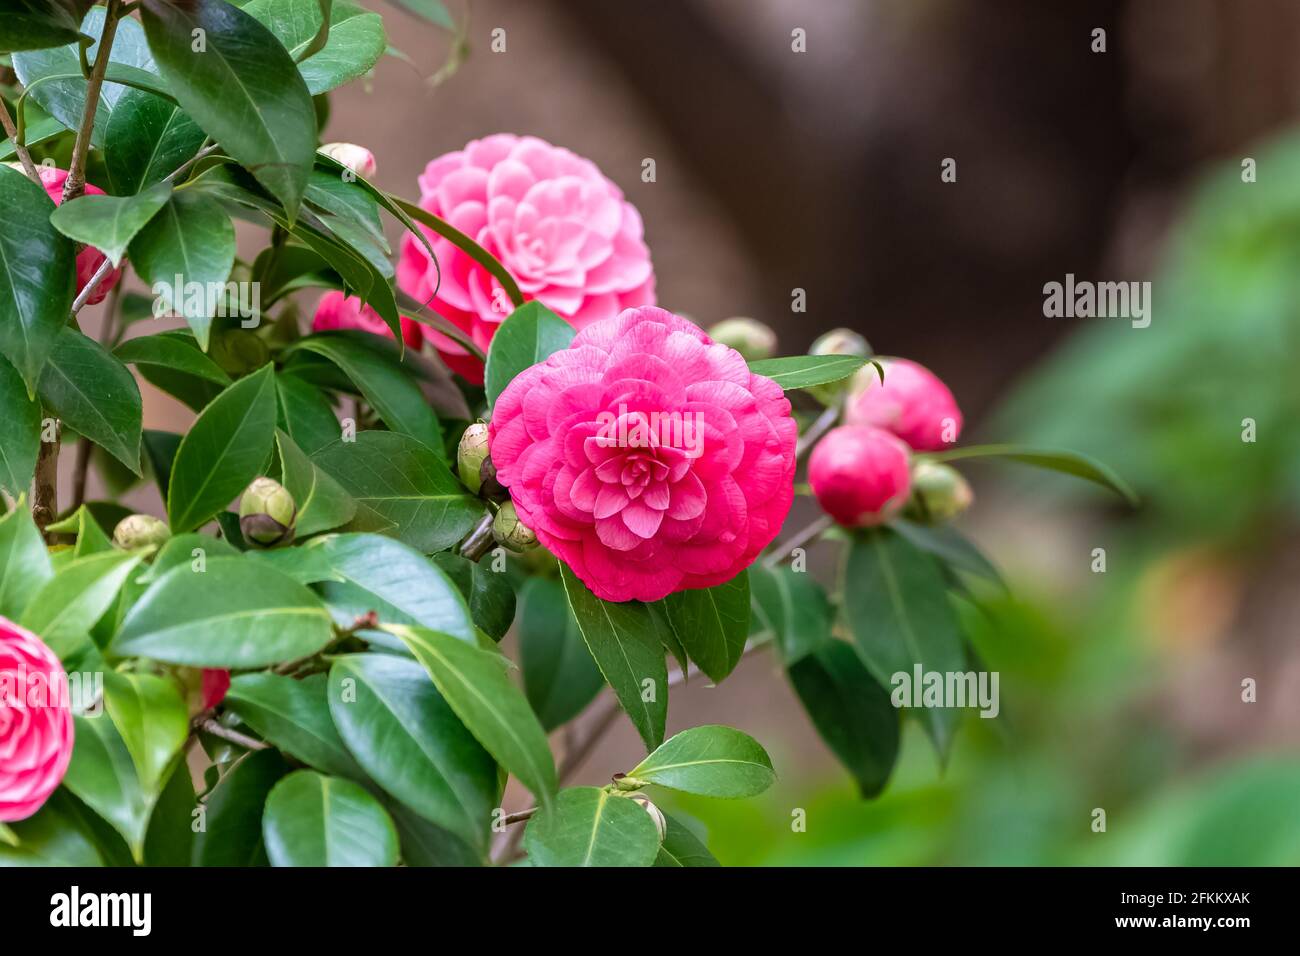 Closeup of pastel pink camellia flowers blooming in the garden Stock Photo